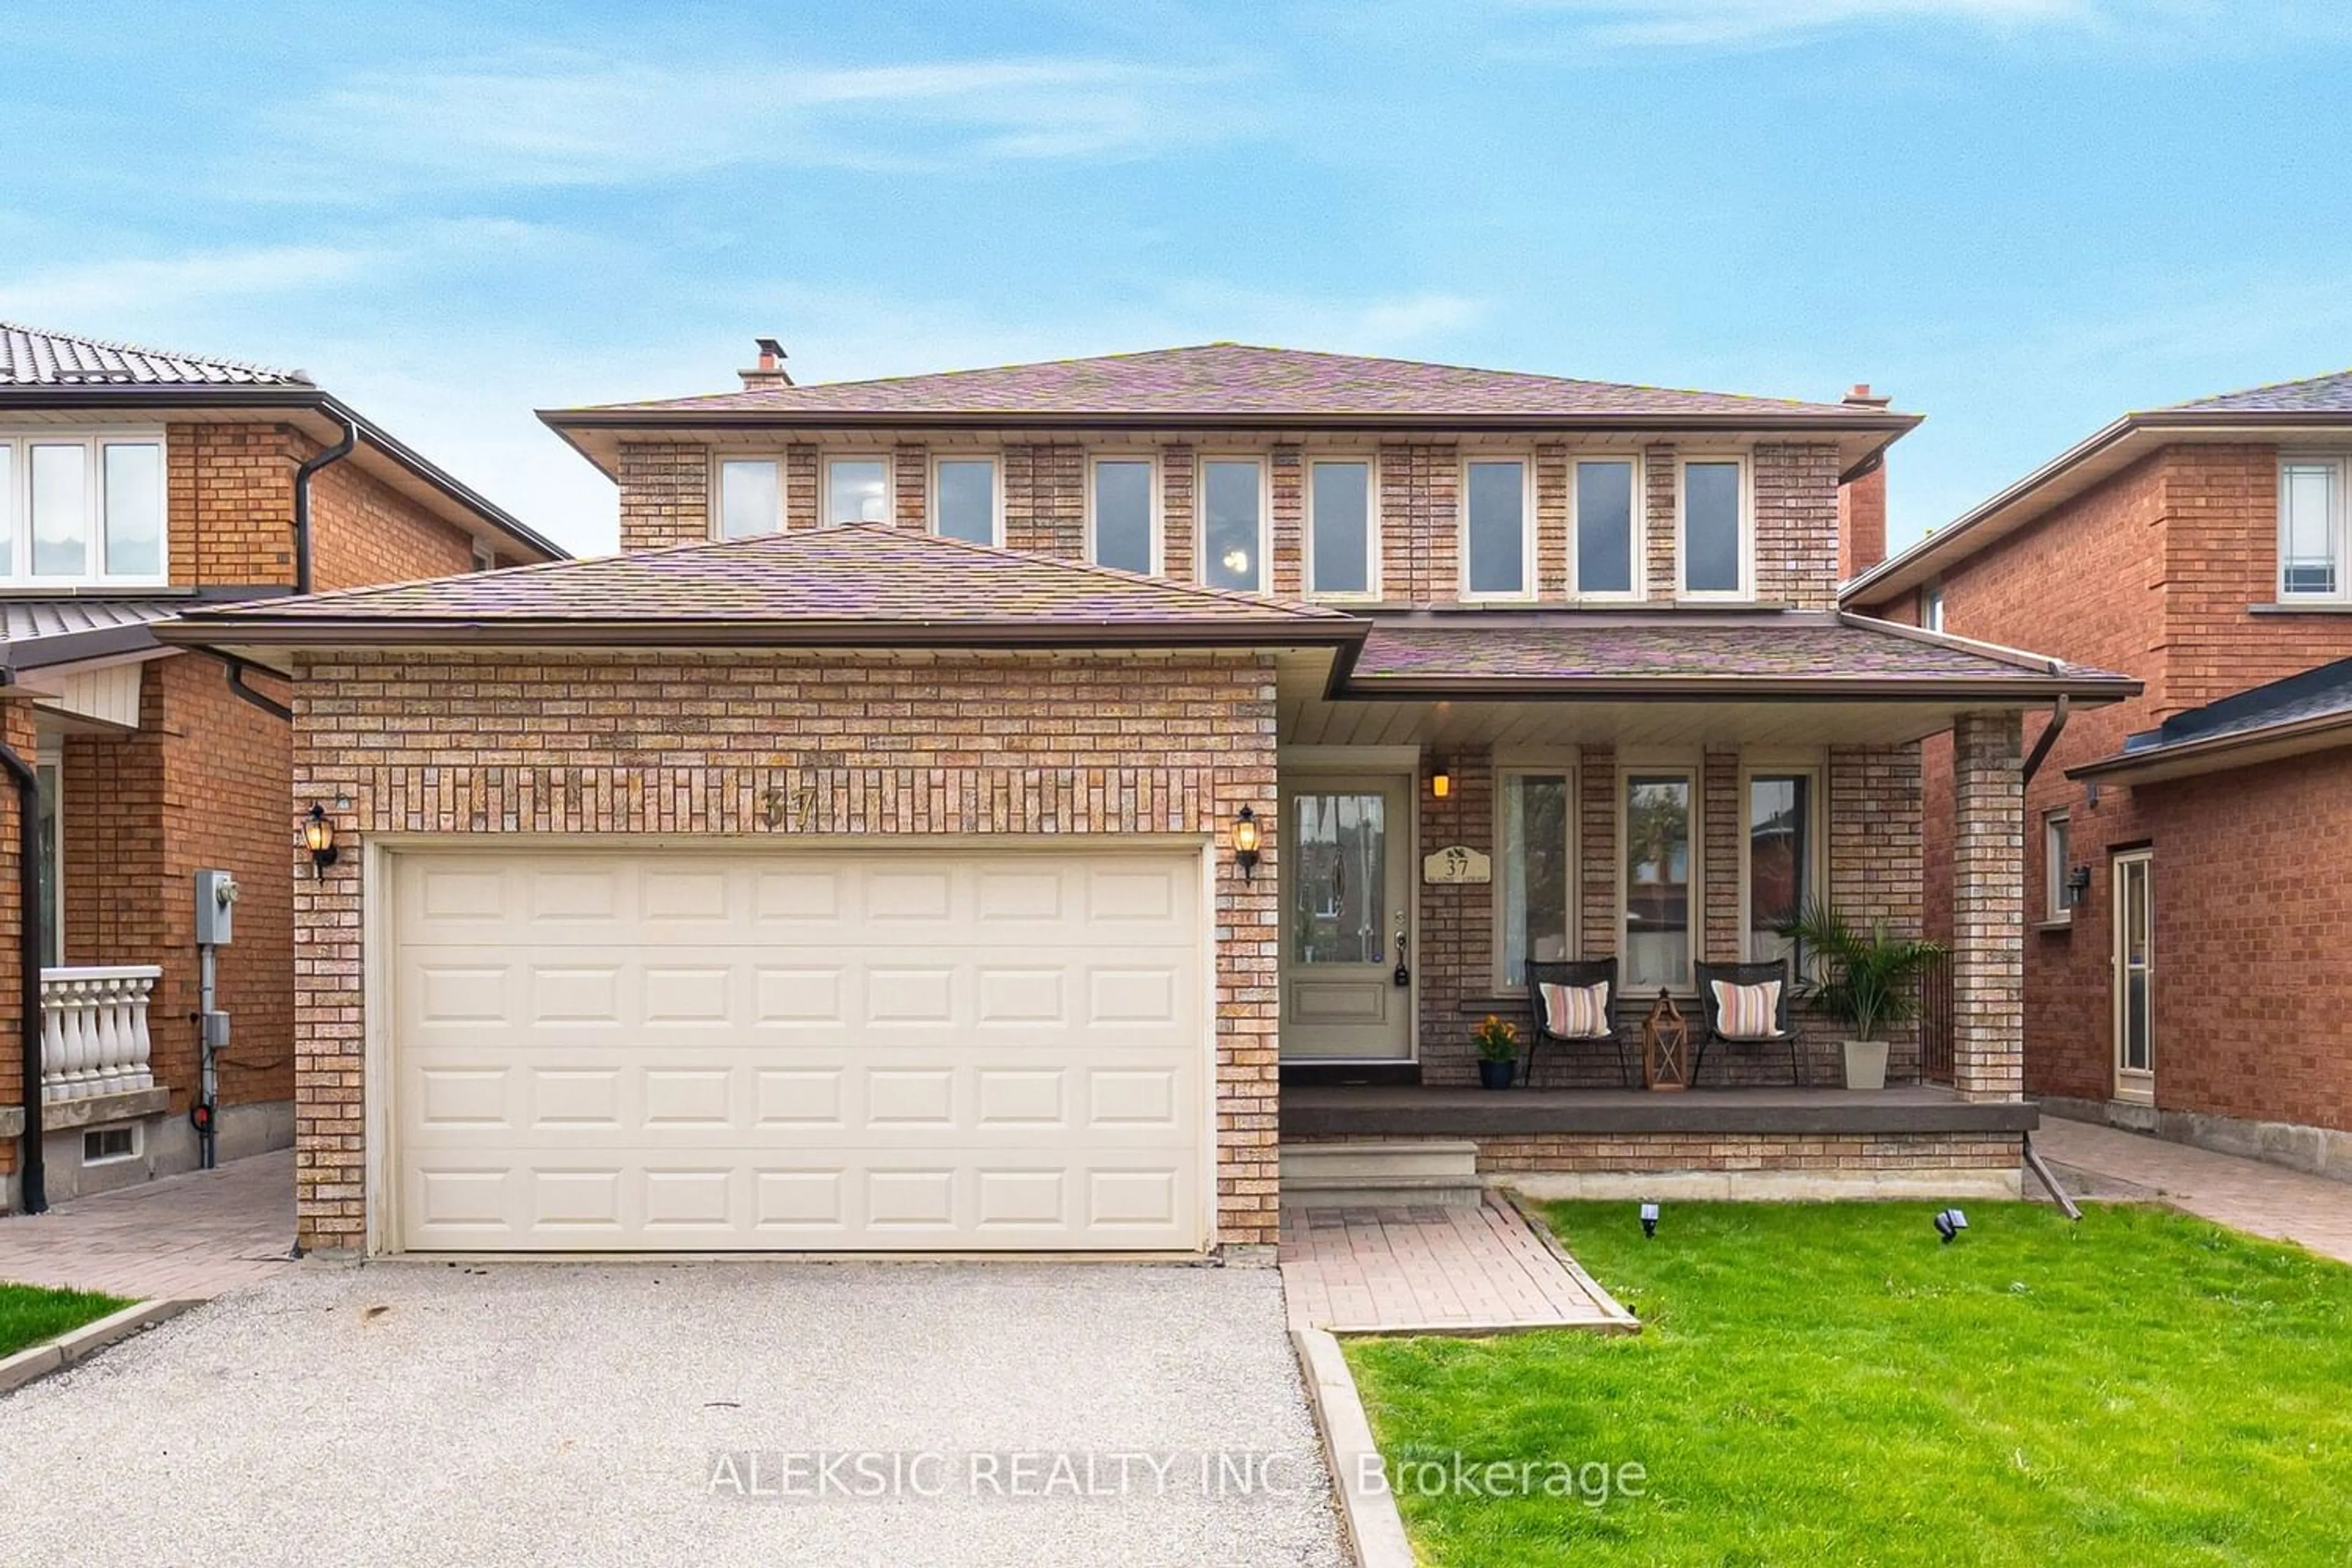 Home with brick exterior material for 37 Blaine Crt, Vaughan Ontario L4L 7V3